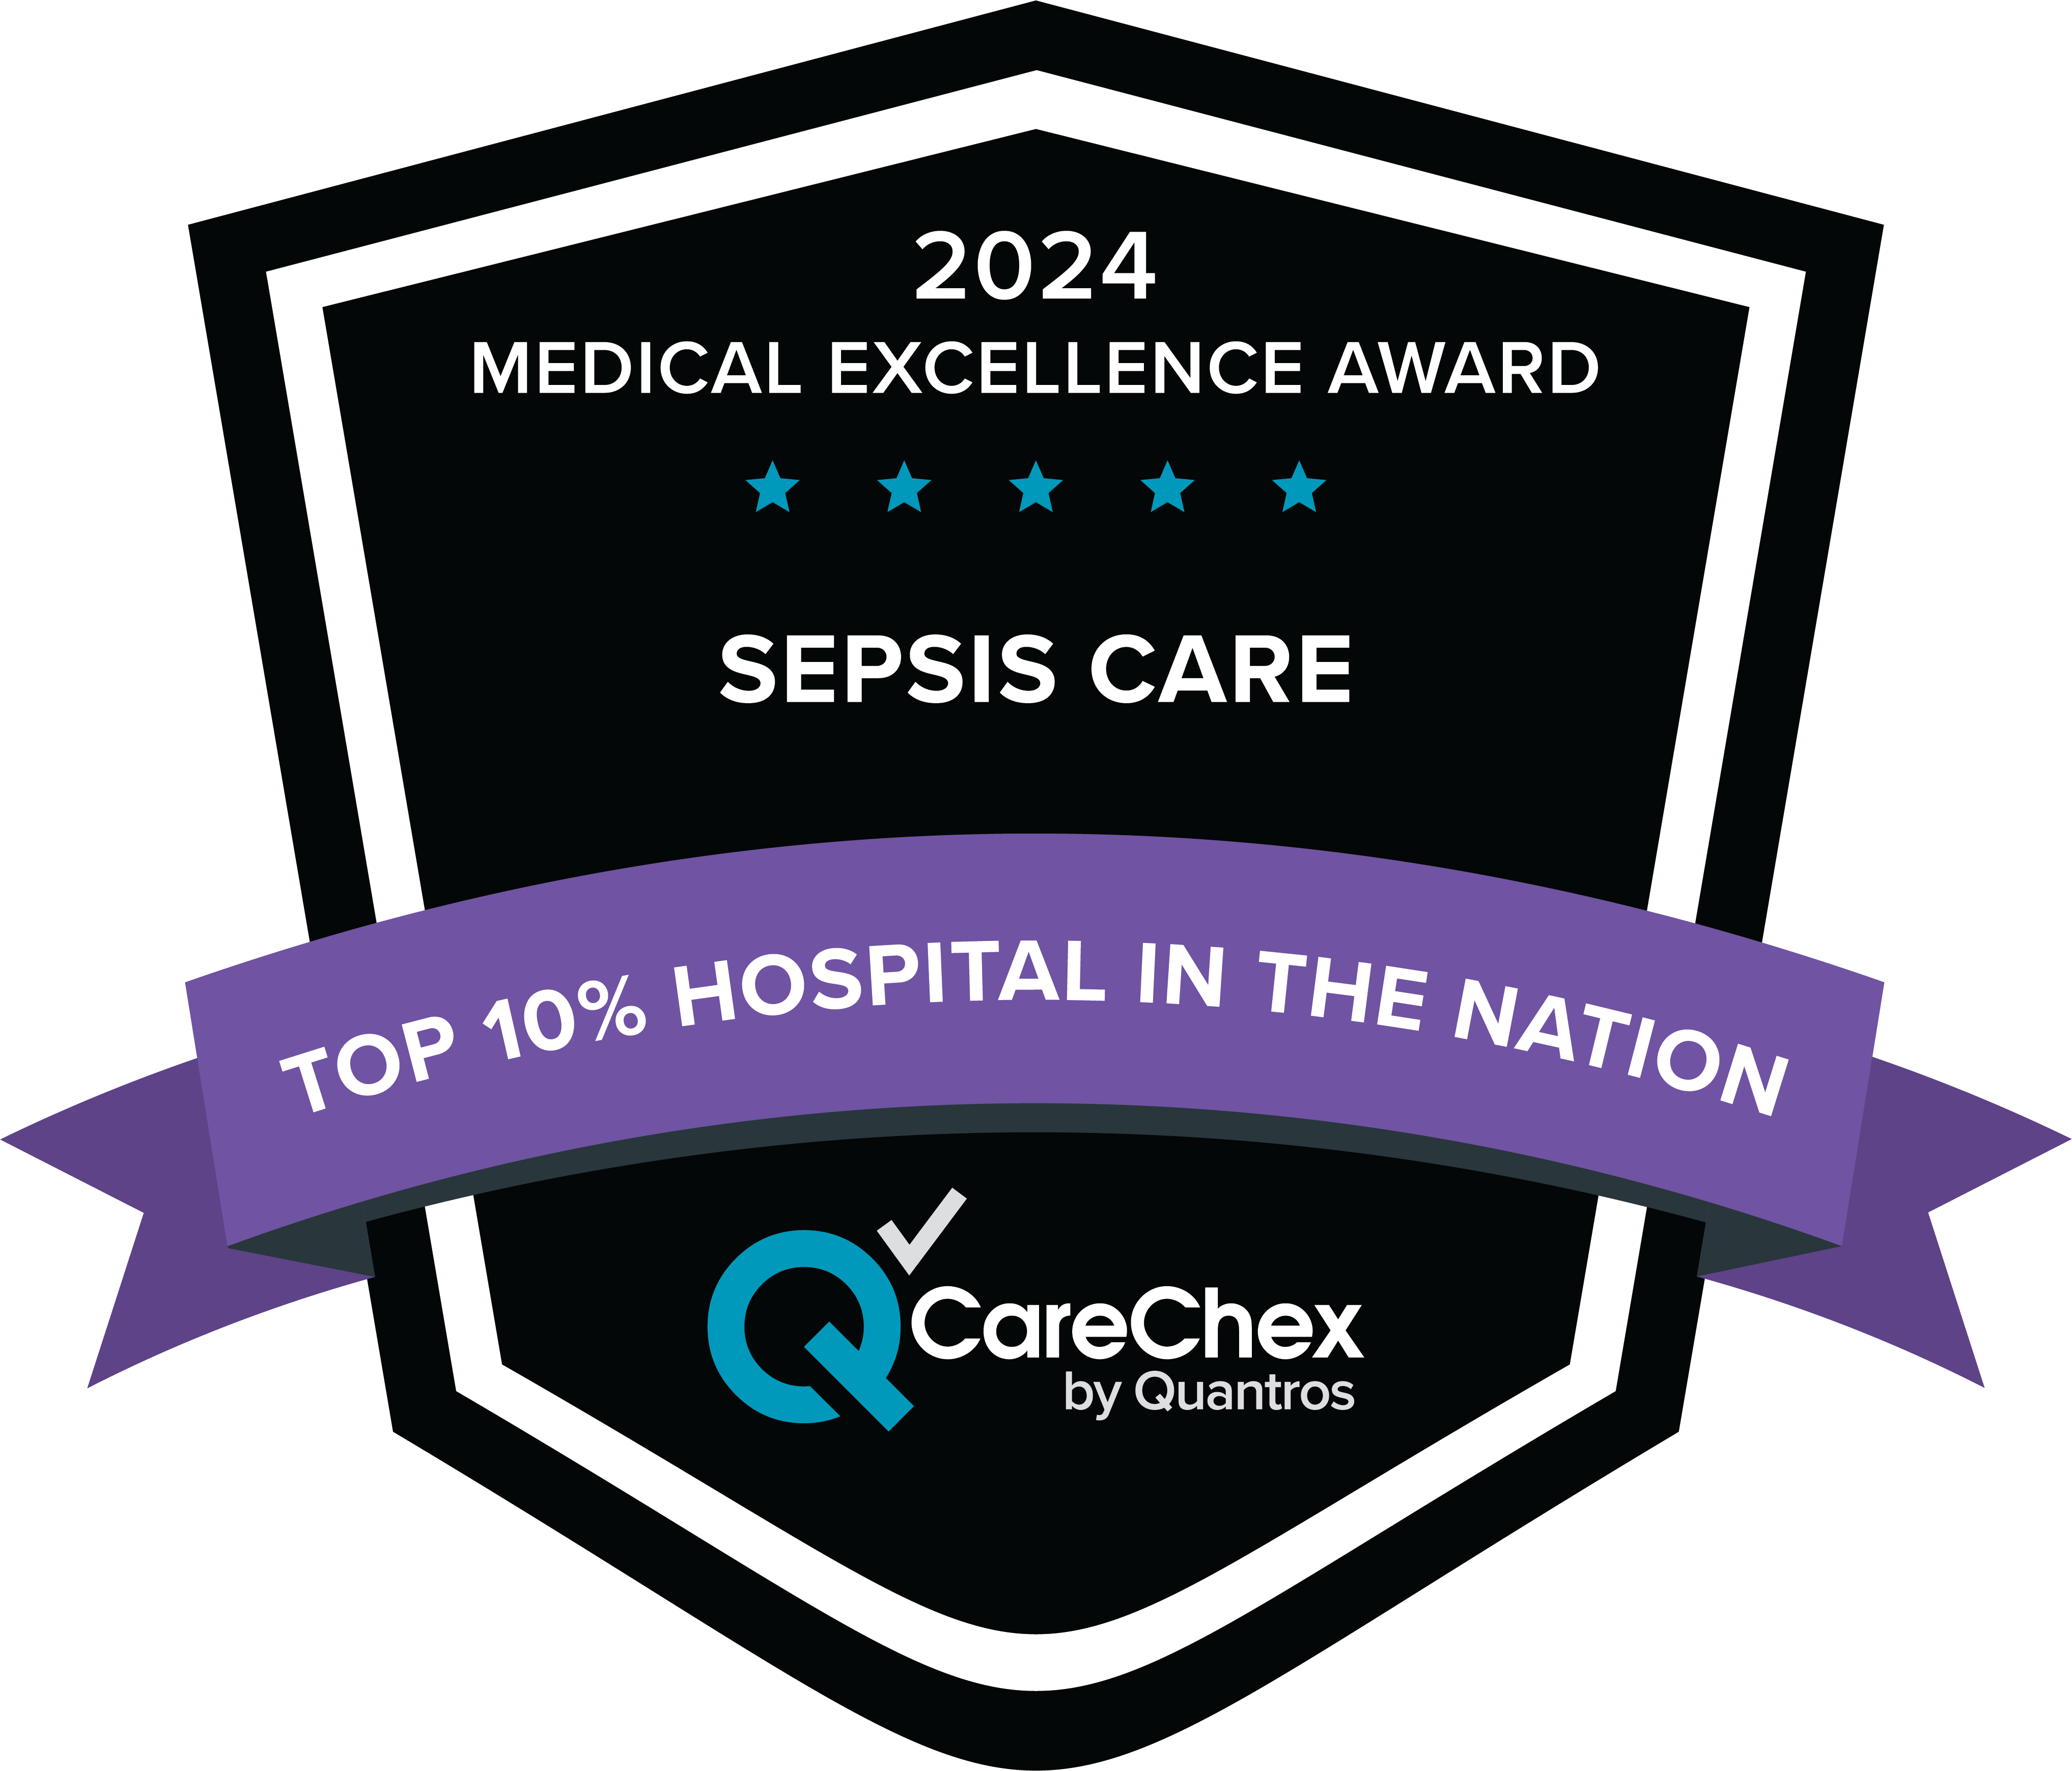 Awards badge for Top 10% Hospital in the Nation for Medical Excellence in Sepsis Care – 2024 CareChex by Quantros